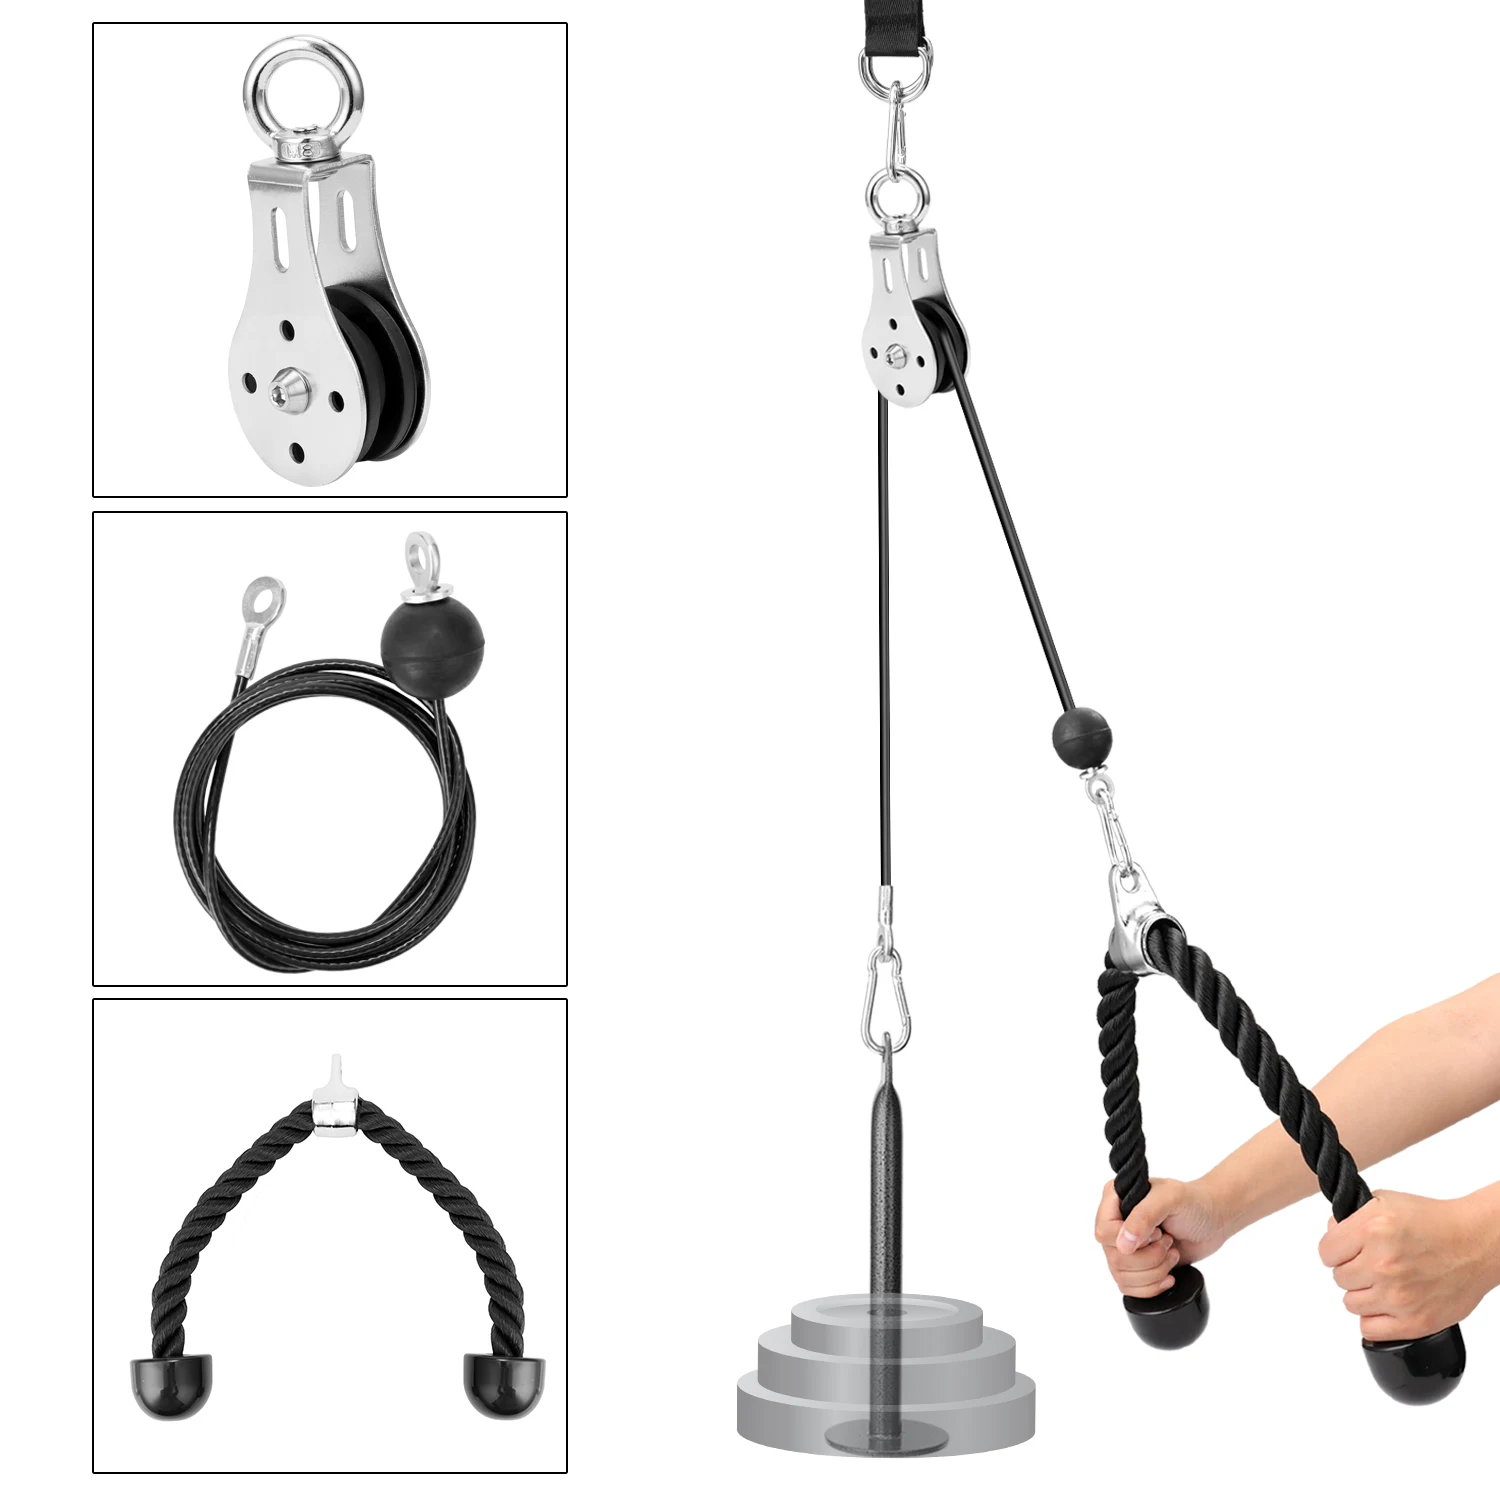 

Fitness DIY Gym Pulley Cable Machine Attachment System Loading Pin Lifting Workout Arm Biceps Triceps Hand Training Equipment